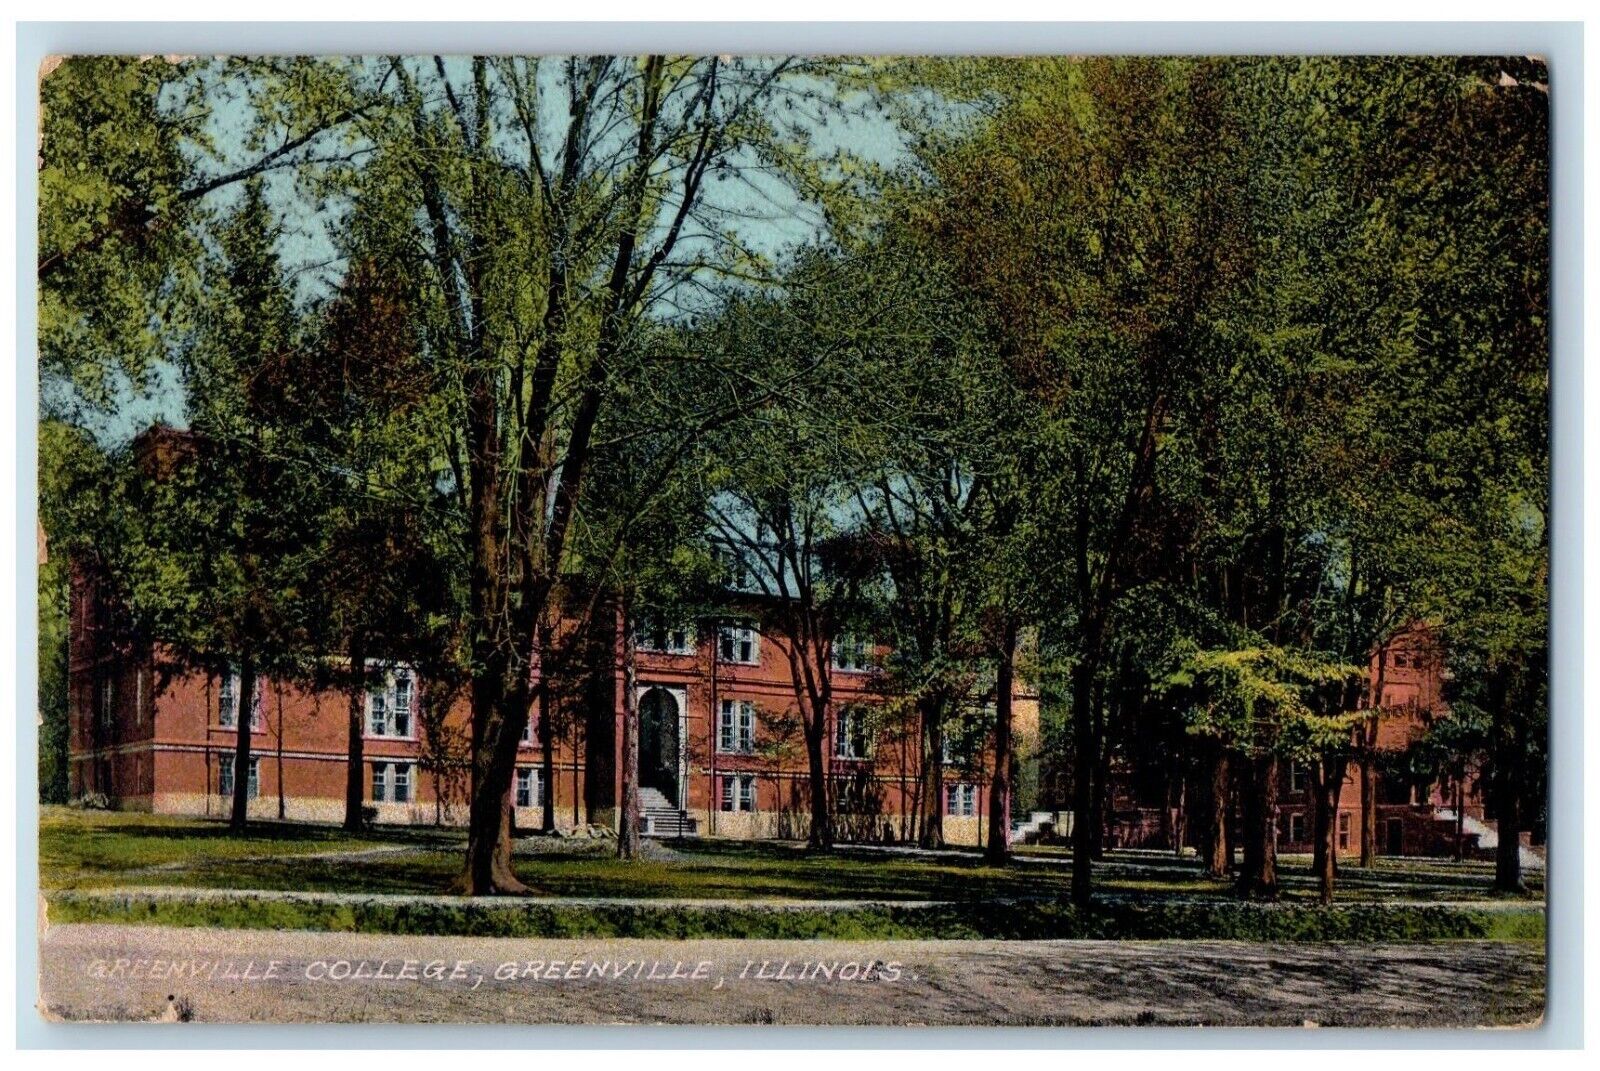 1910 Front View Of Greenville College Building Greenville Illinois IL Postcard